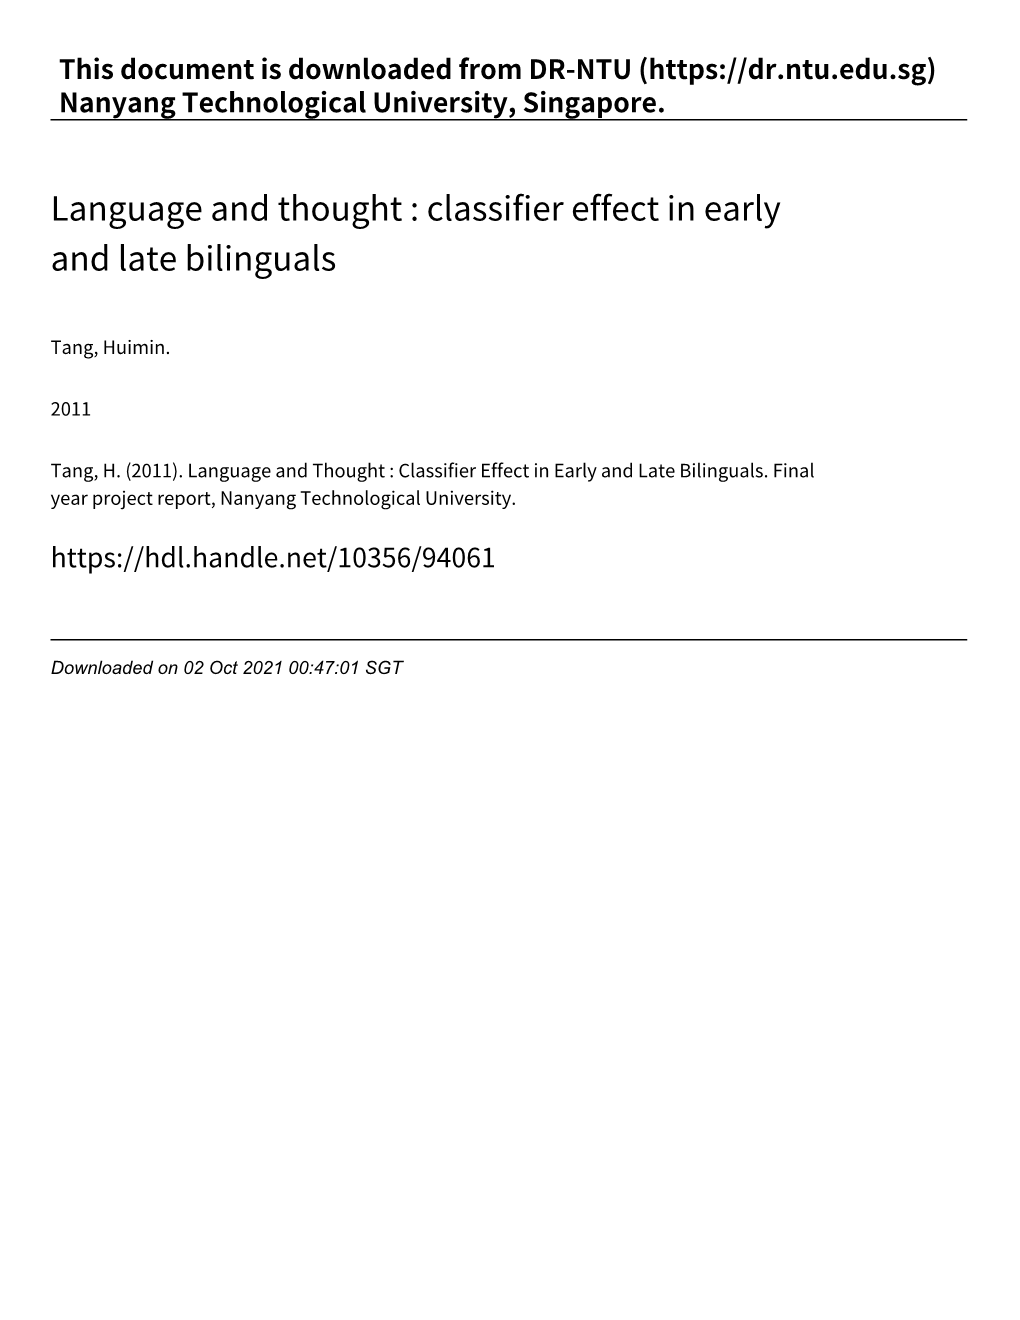 Classifier Effect in Early and Late Bilinguals